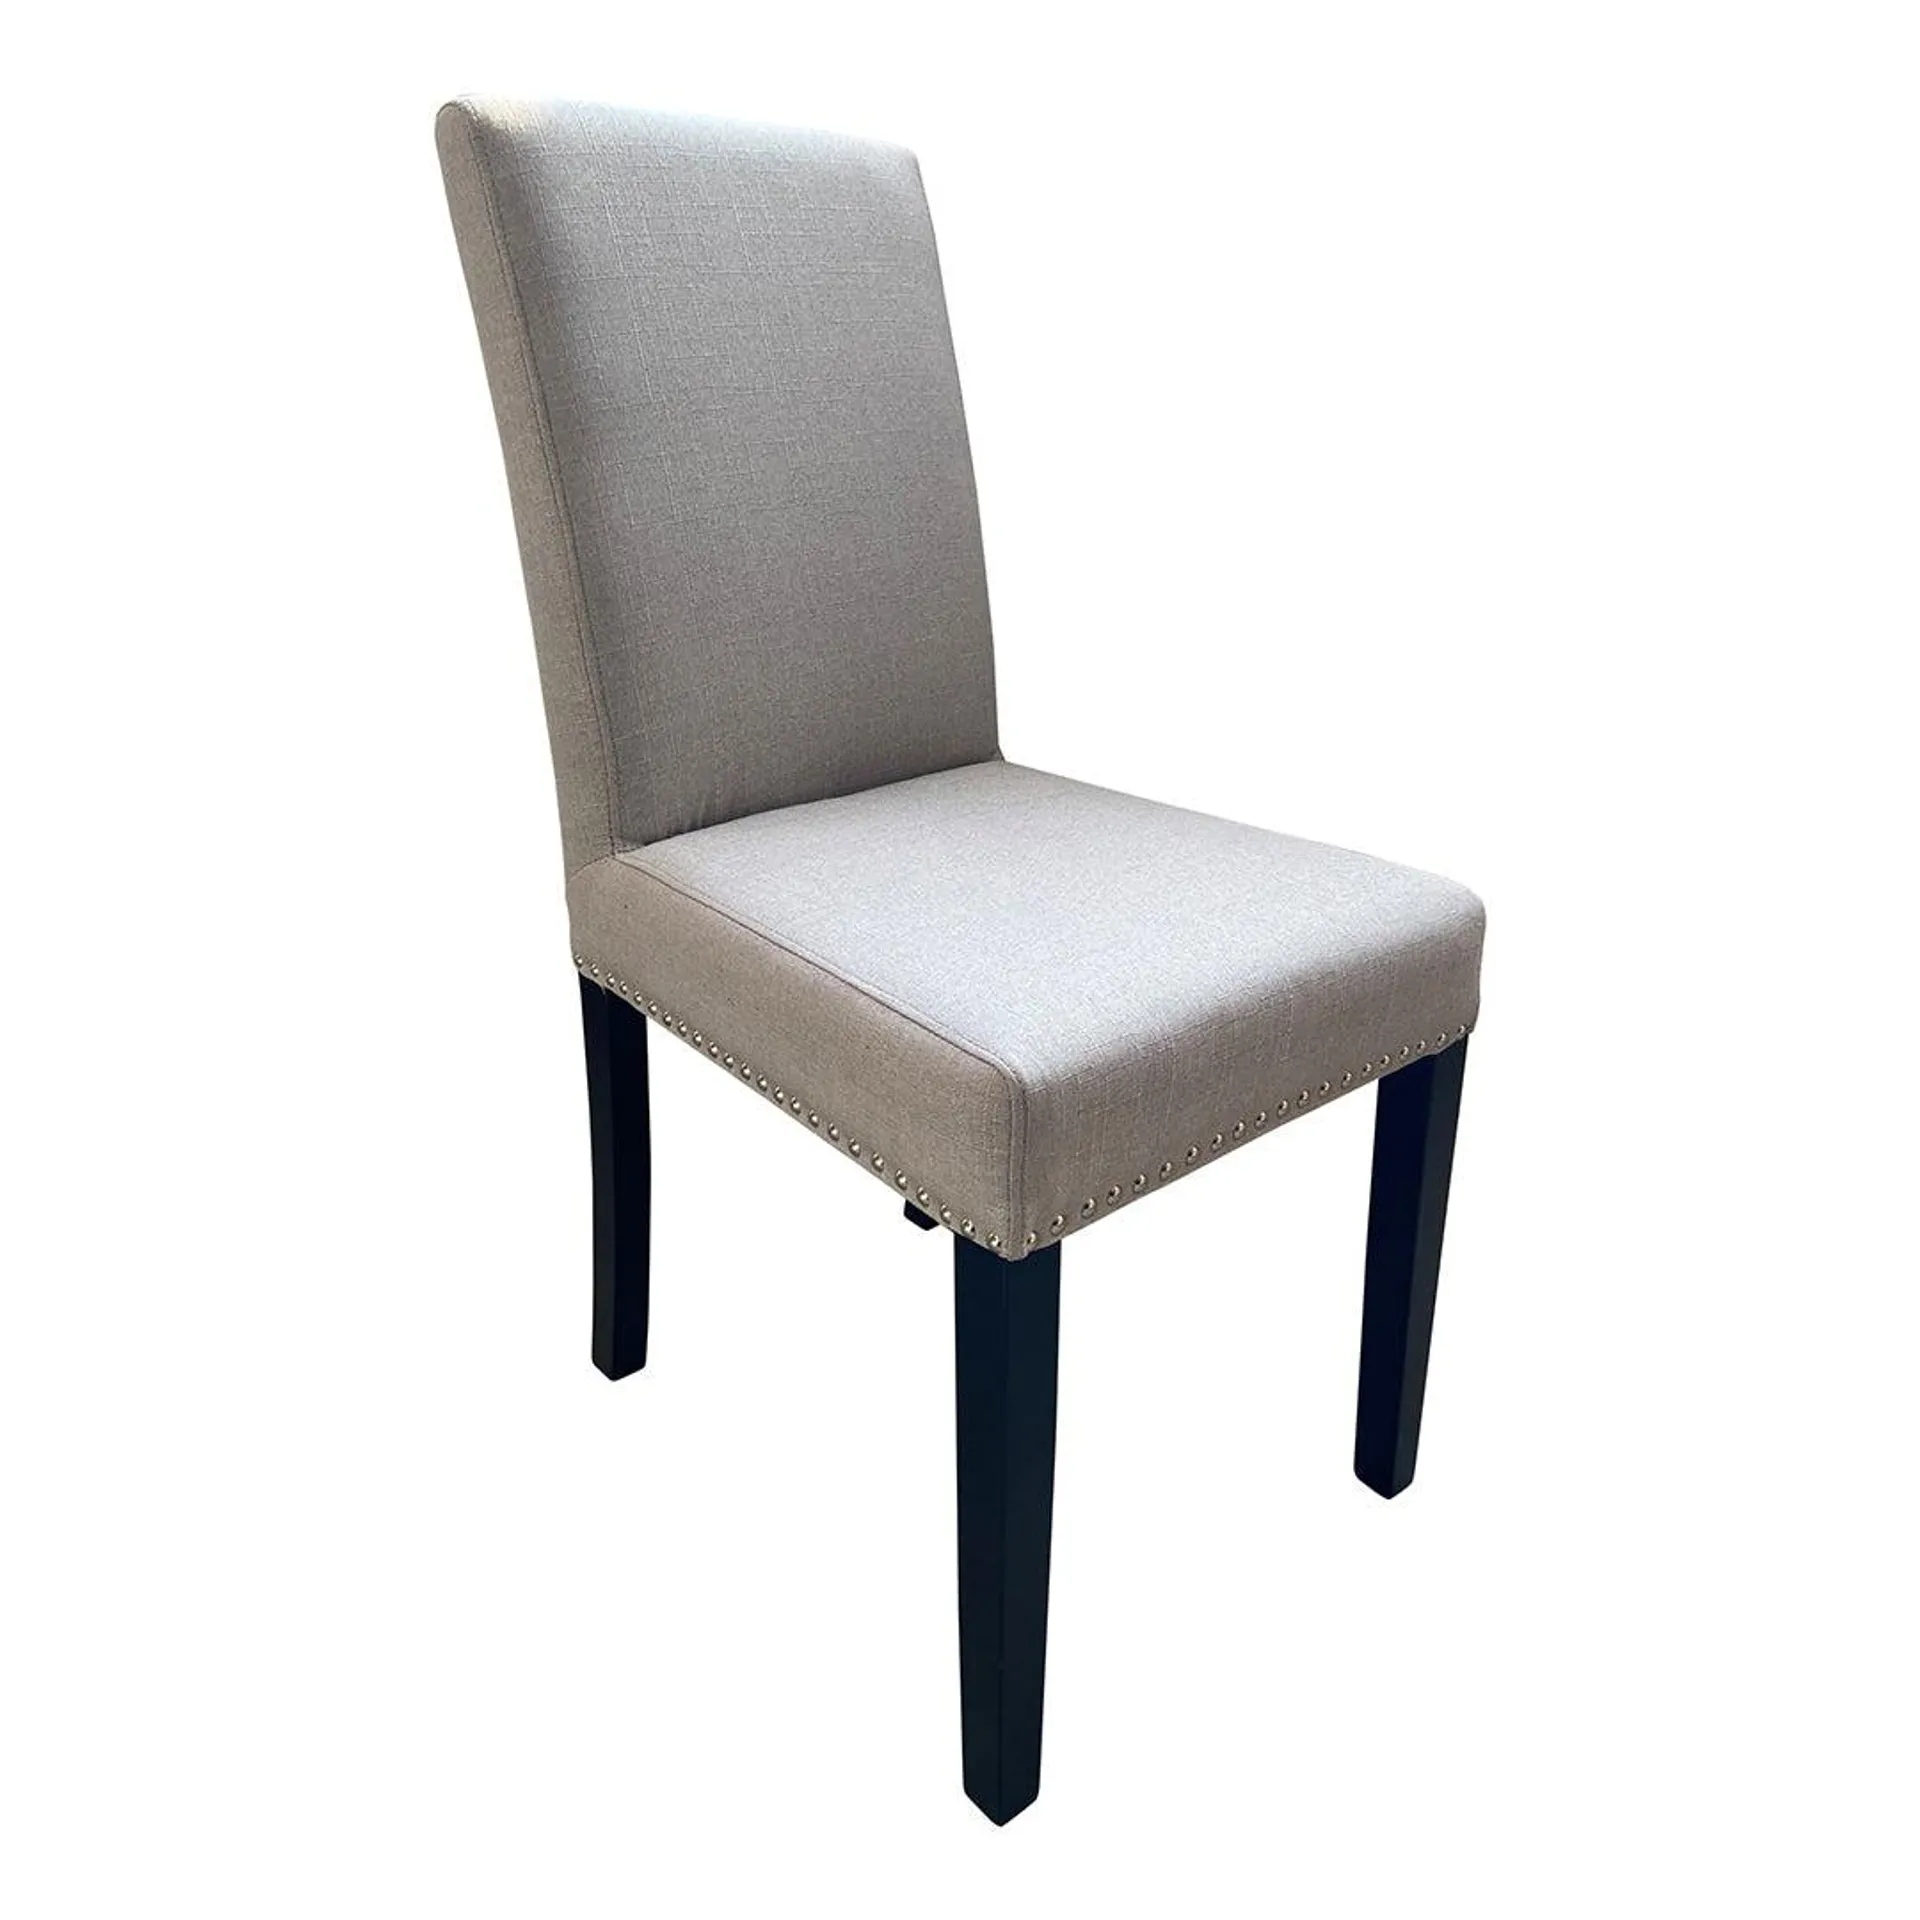 Parson Chair with Nailheads (2 colors)